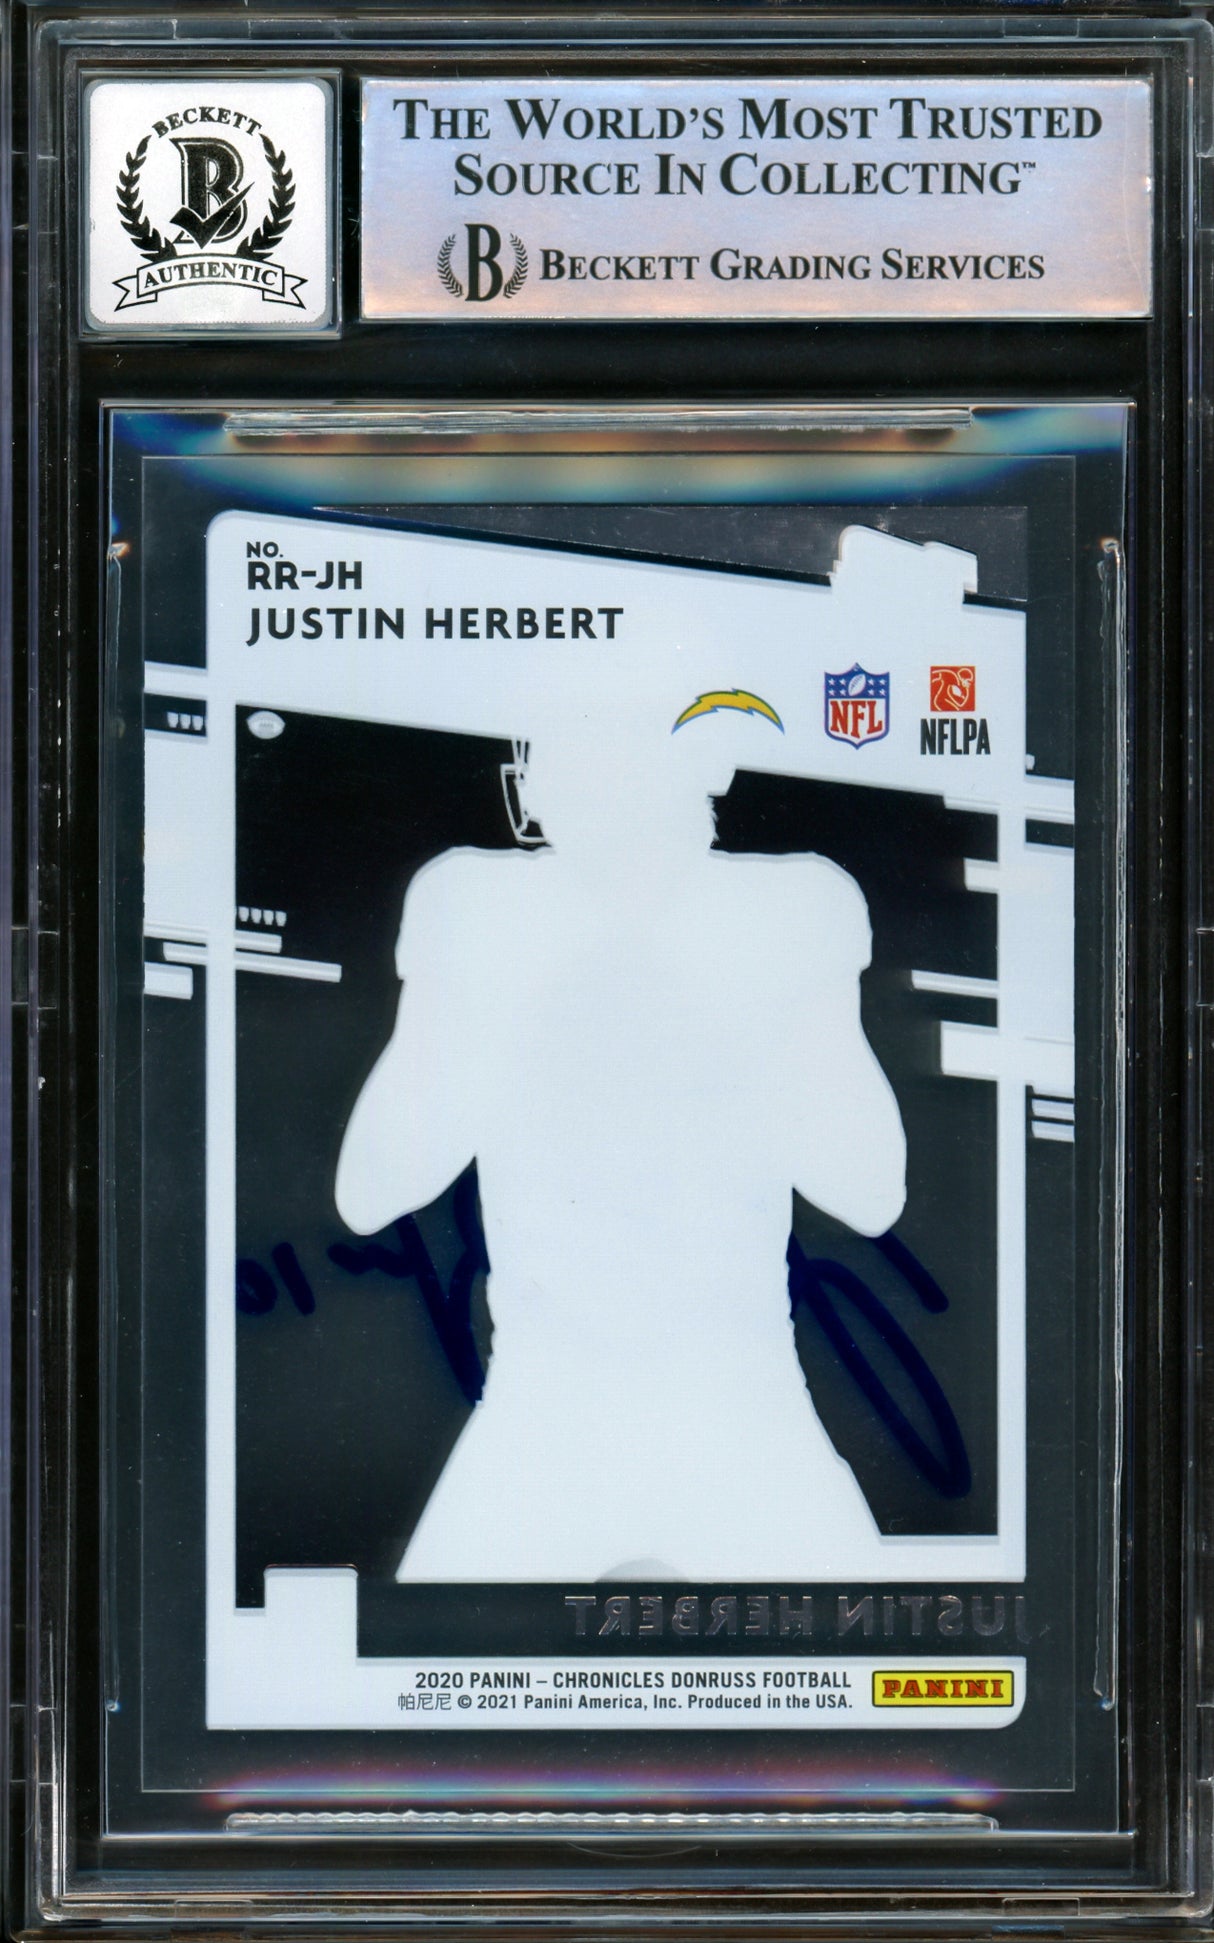 Justin Herbert Autographed 2020 Donruss Clearly Rated Rookie Card #RR-JH Los Angeles Chargers Auto Grade Gem Mint 10 Beckett BAS Stock #206076